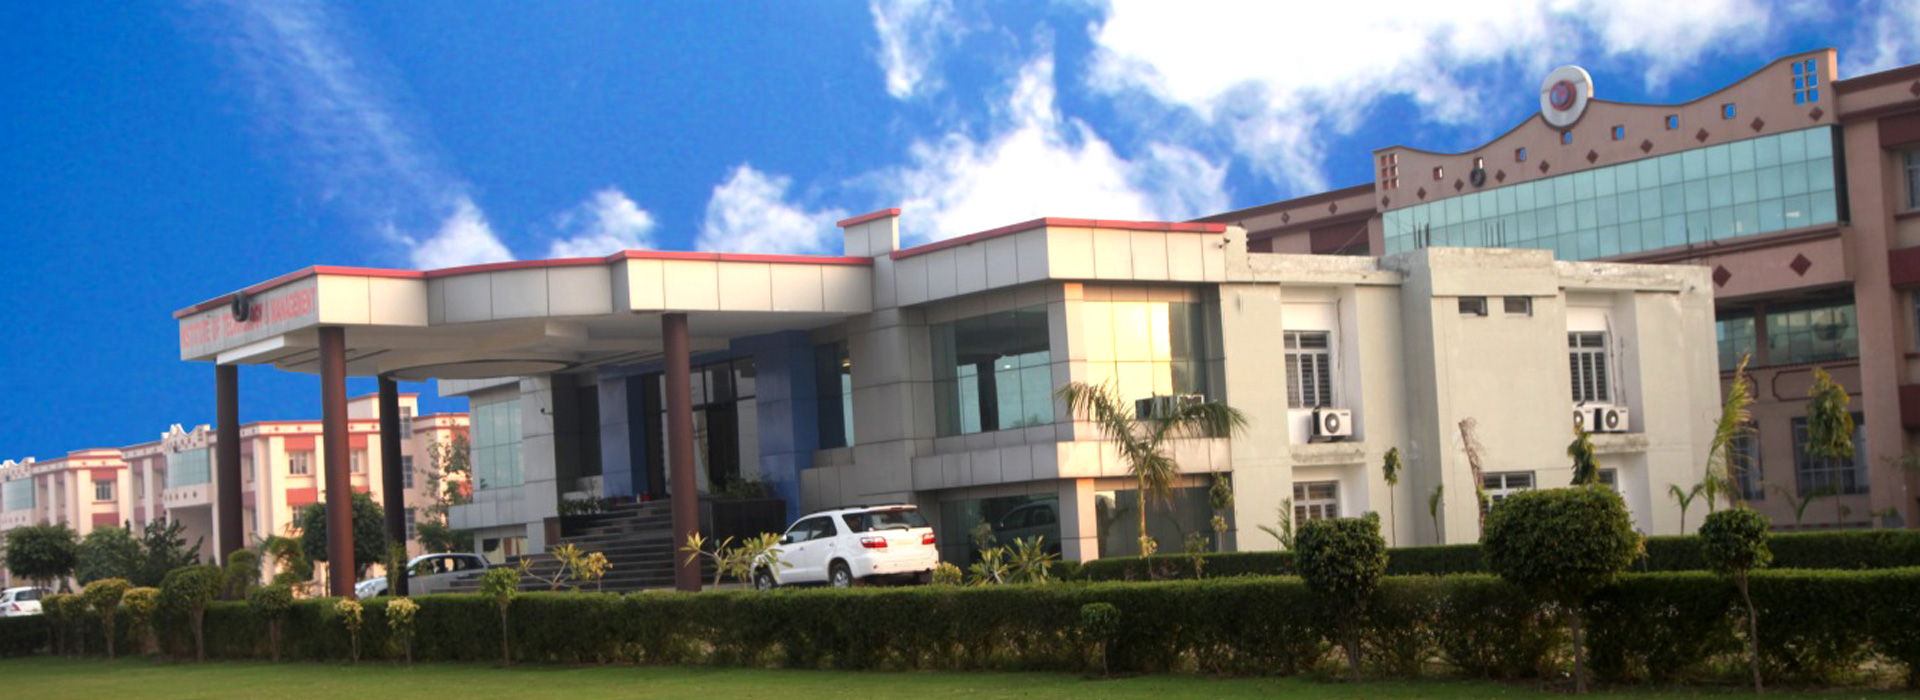 Institute of Technology and Management, Aligarh Image